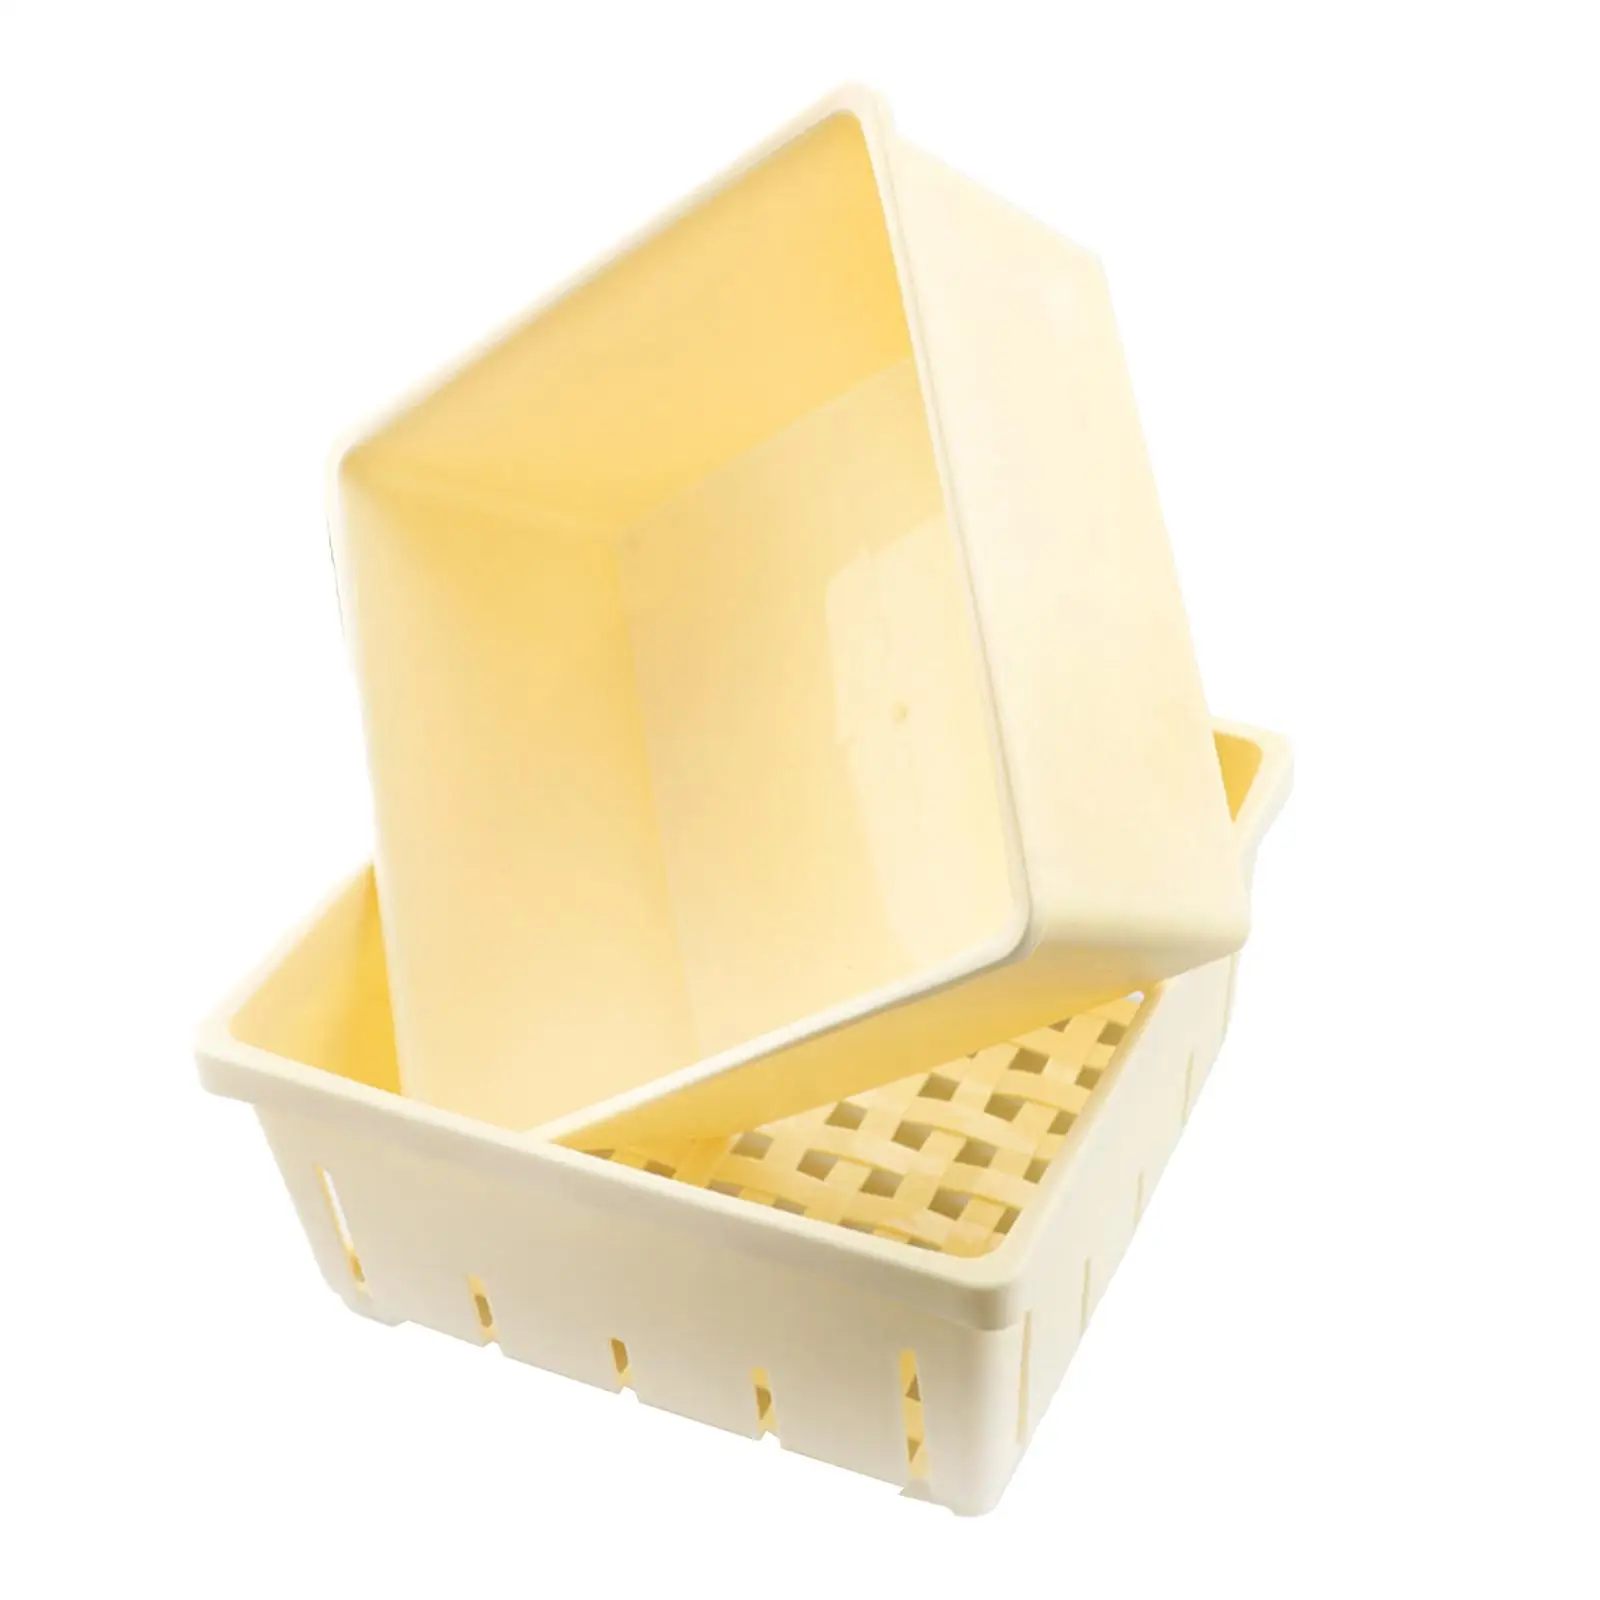 DIY Tofu Press Mould Durable Homemade Tofu Mold Soybean Curd Making Machine Hand Tool Easily Remove Water Household for Home Use